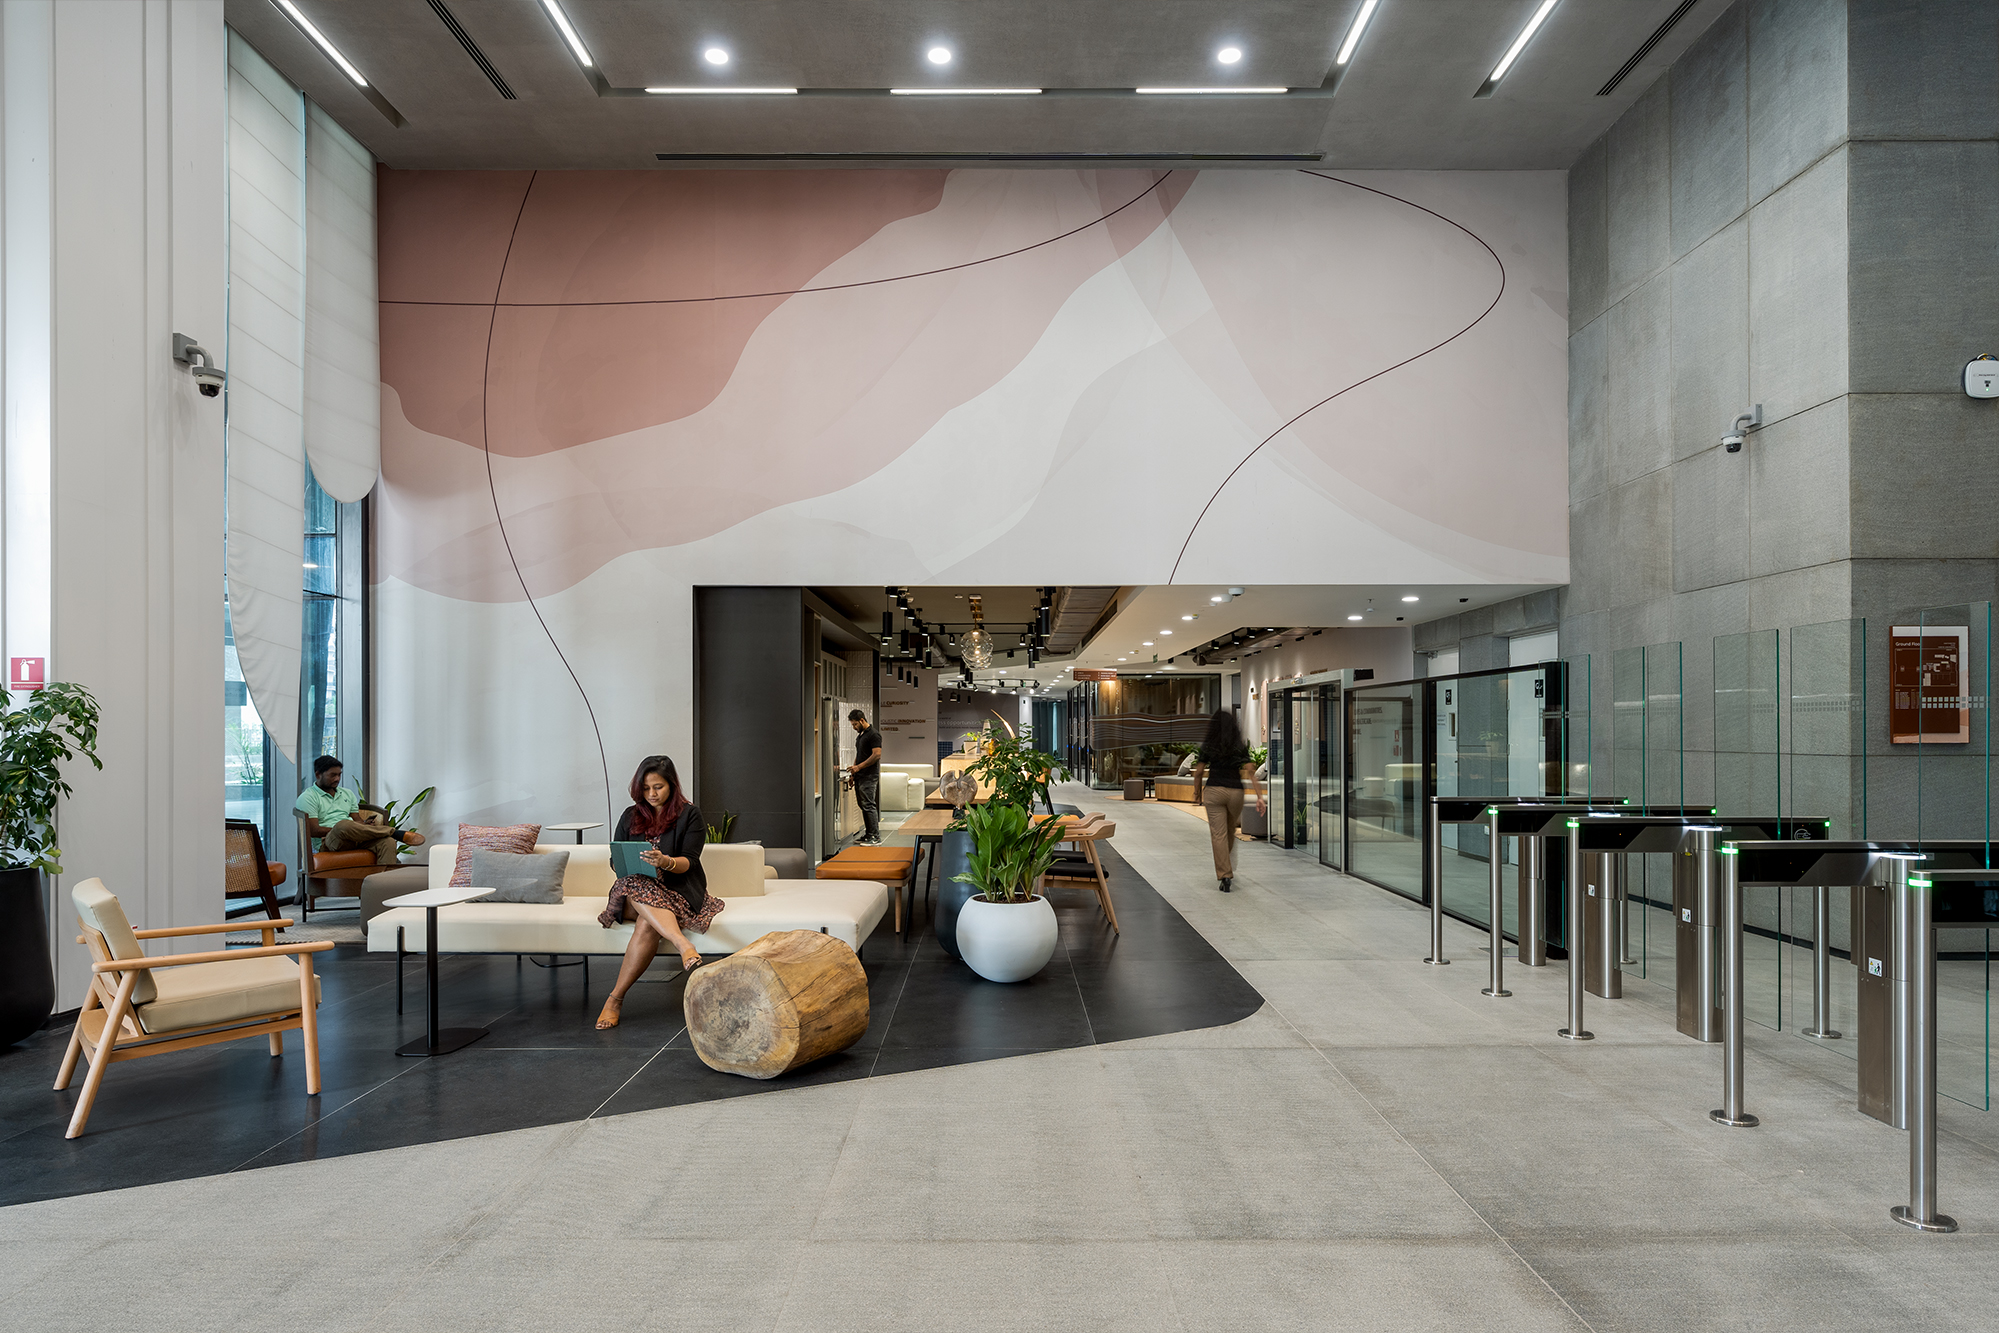 Legato’s workplace encourages teamwork and productivity in the workplace